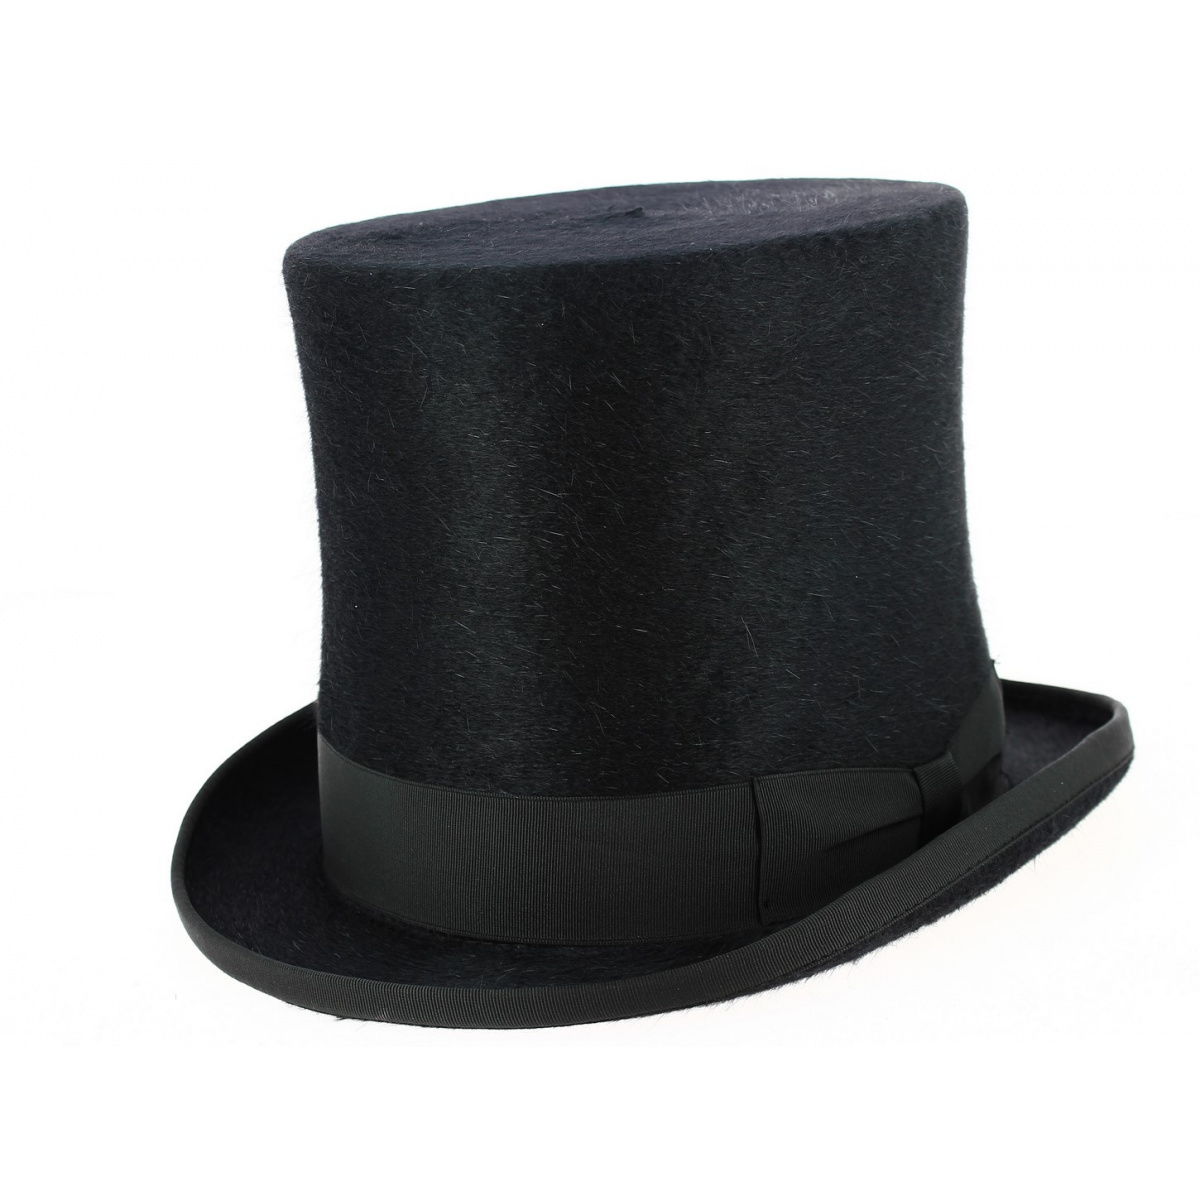 Top Hat black melusine 16 cm - Traclet Reference : 9059 | Chapellerie ...